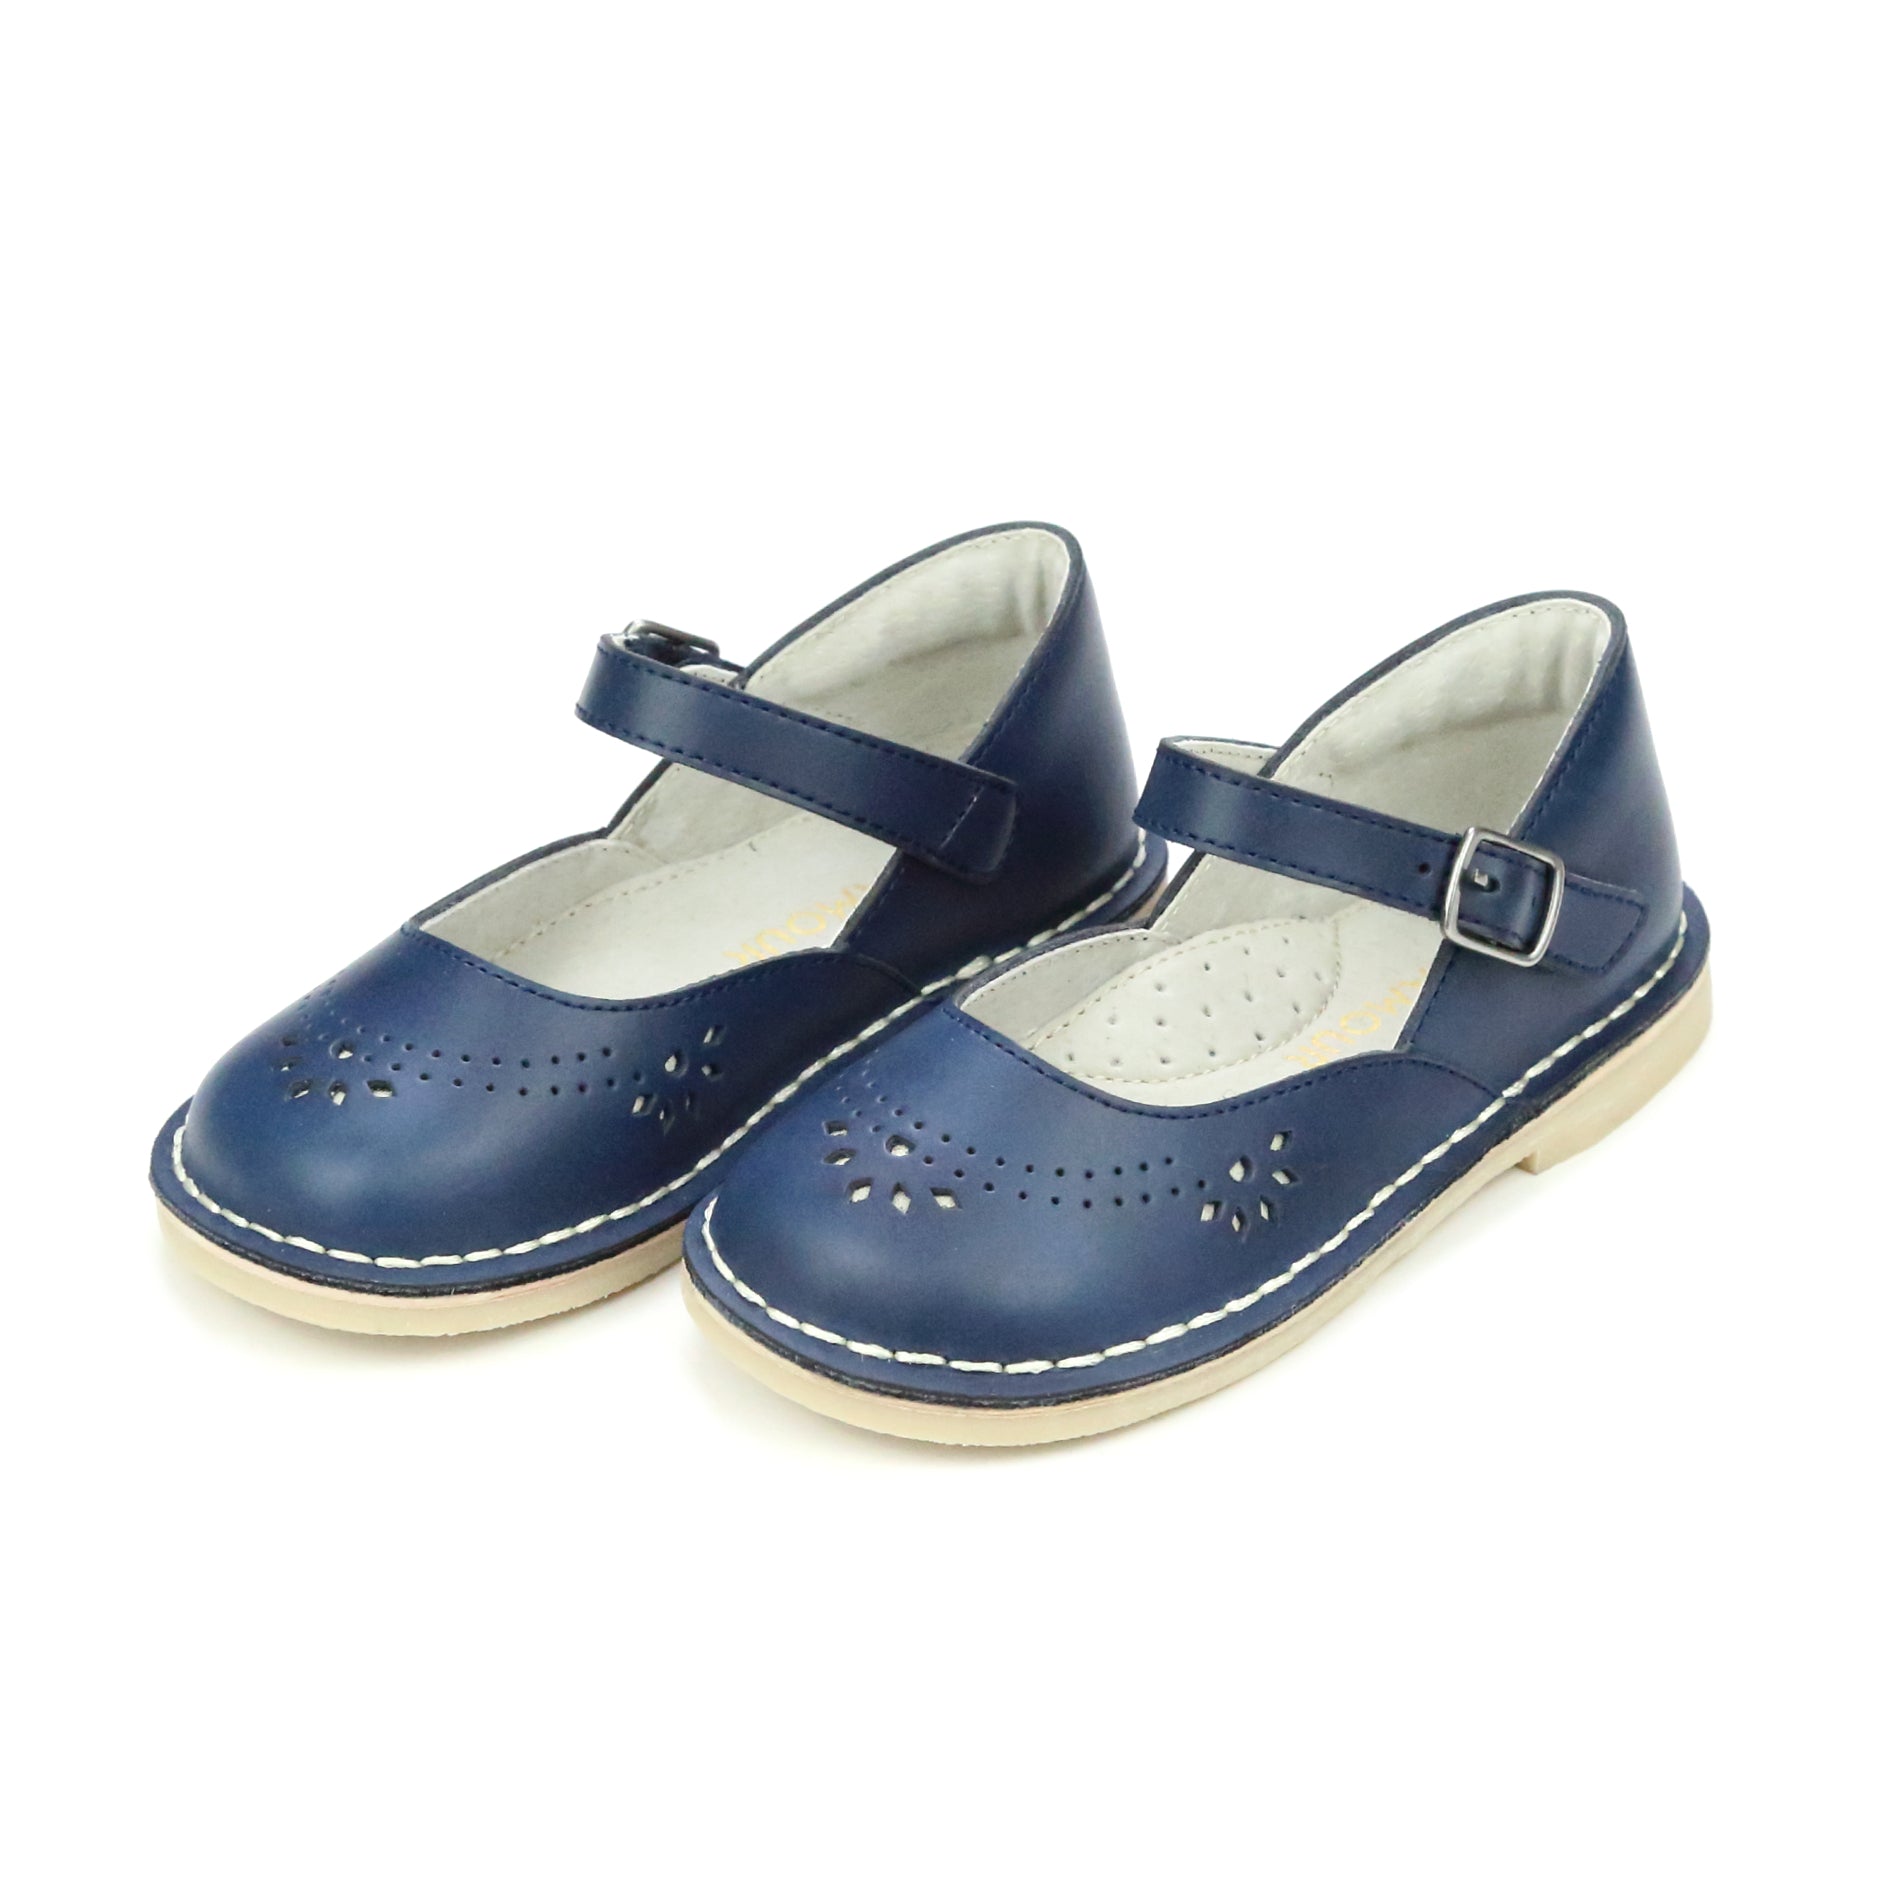 L'Amour Shoes Antonia Toddler Girl Classic Leather Mary Jane School Shoes